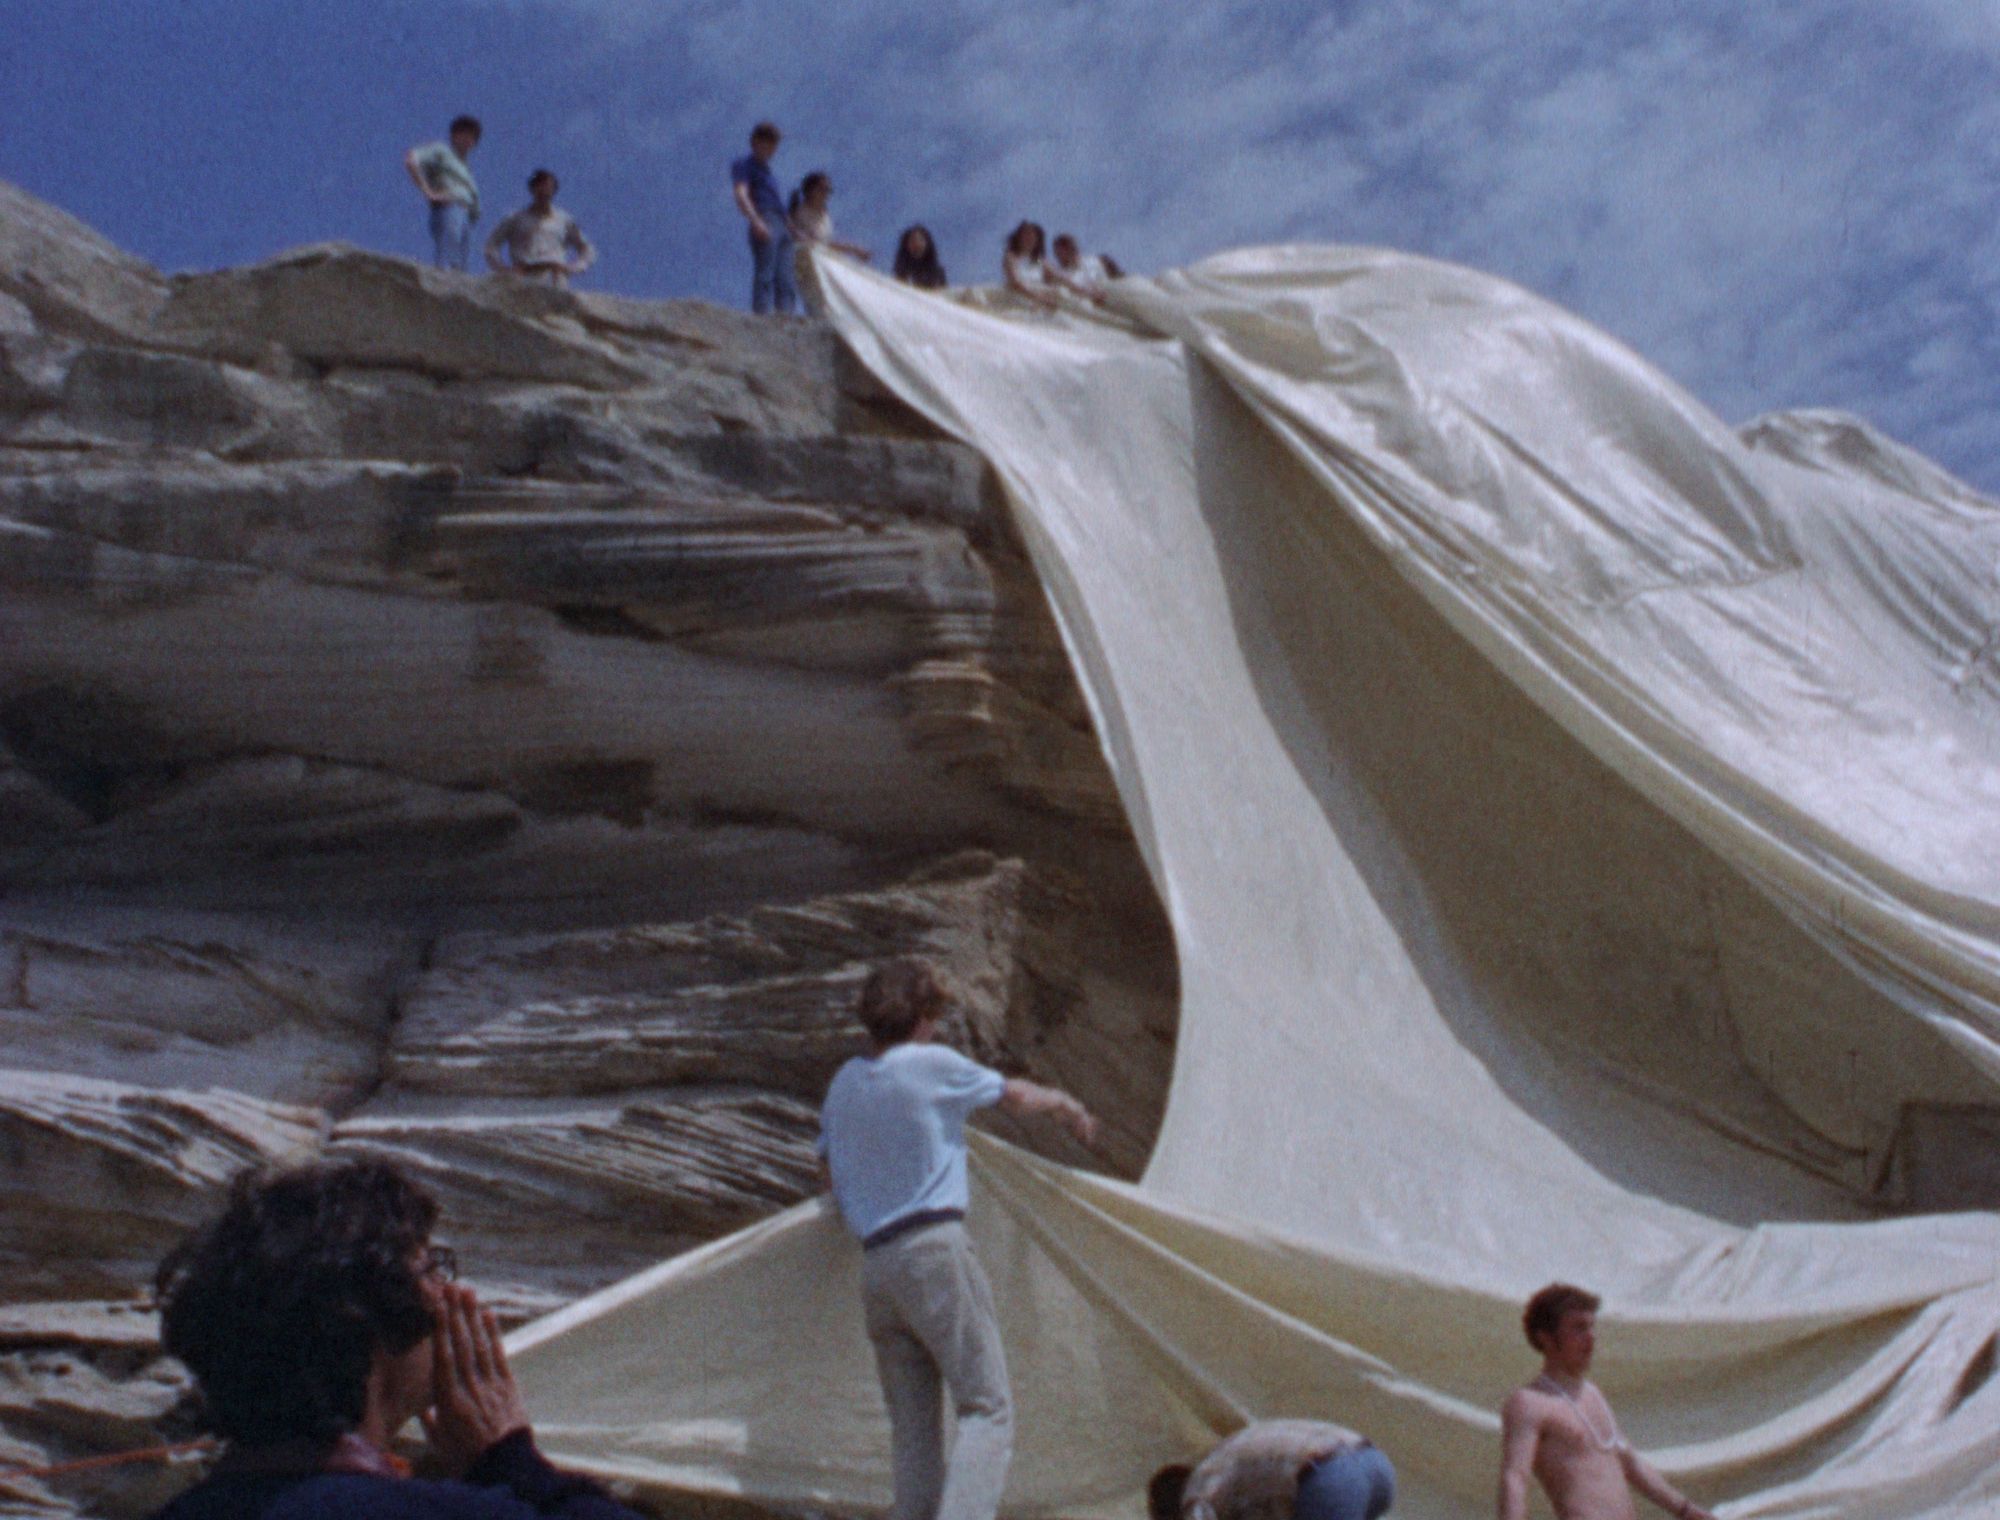 A group of people wrap a cliff front with white fabric.